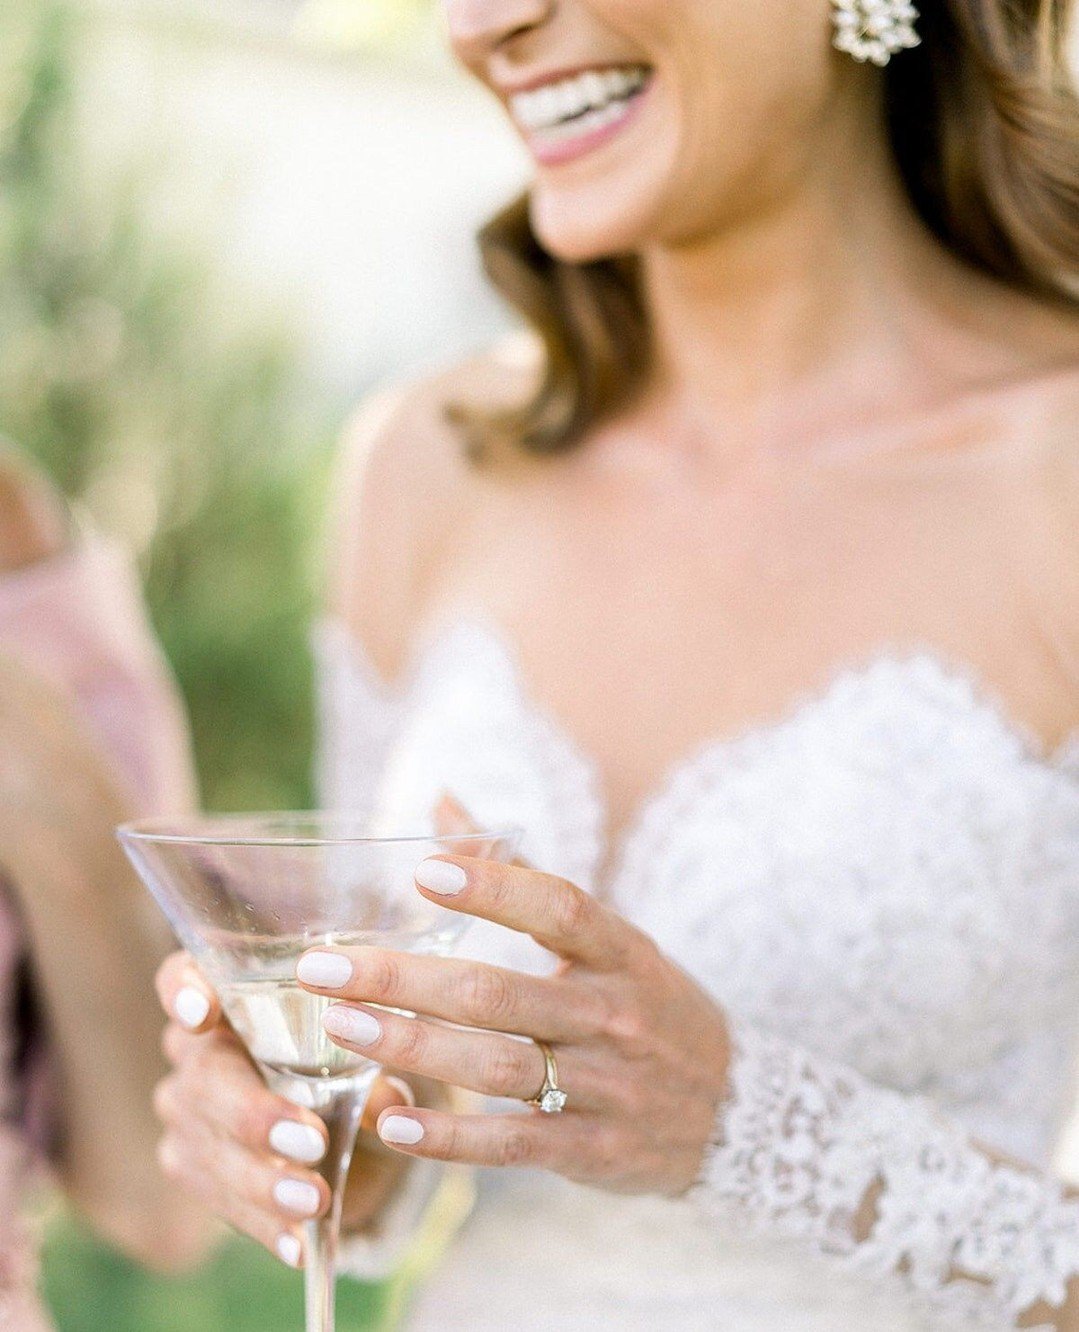 The pearls, the palette, the cut of the bride&rsquo;s gown: we are in love with every last detail.⁠
⁠
Visit the blog for more of this week's La Salle Park wedding feature! ⁠
⁠
#WeddingInspiration #WeddingPlanner #BridalStyle #WeddingDetails #DreamWed